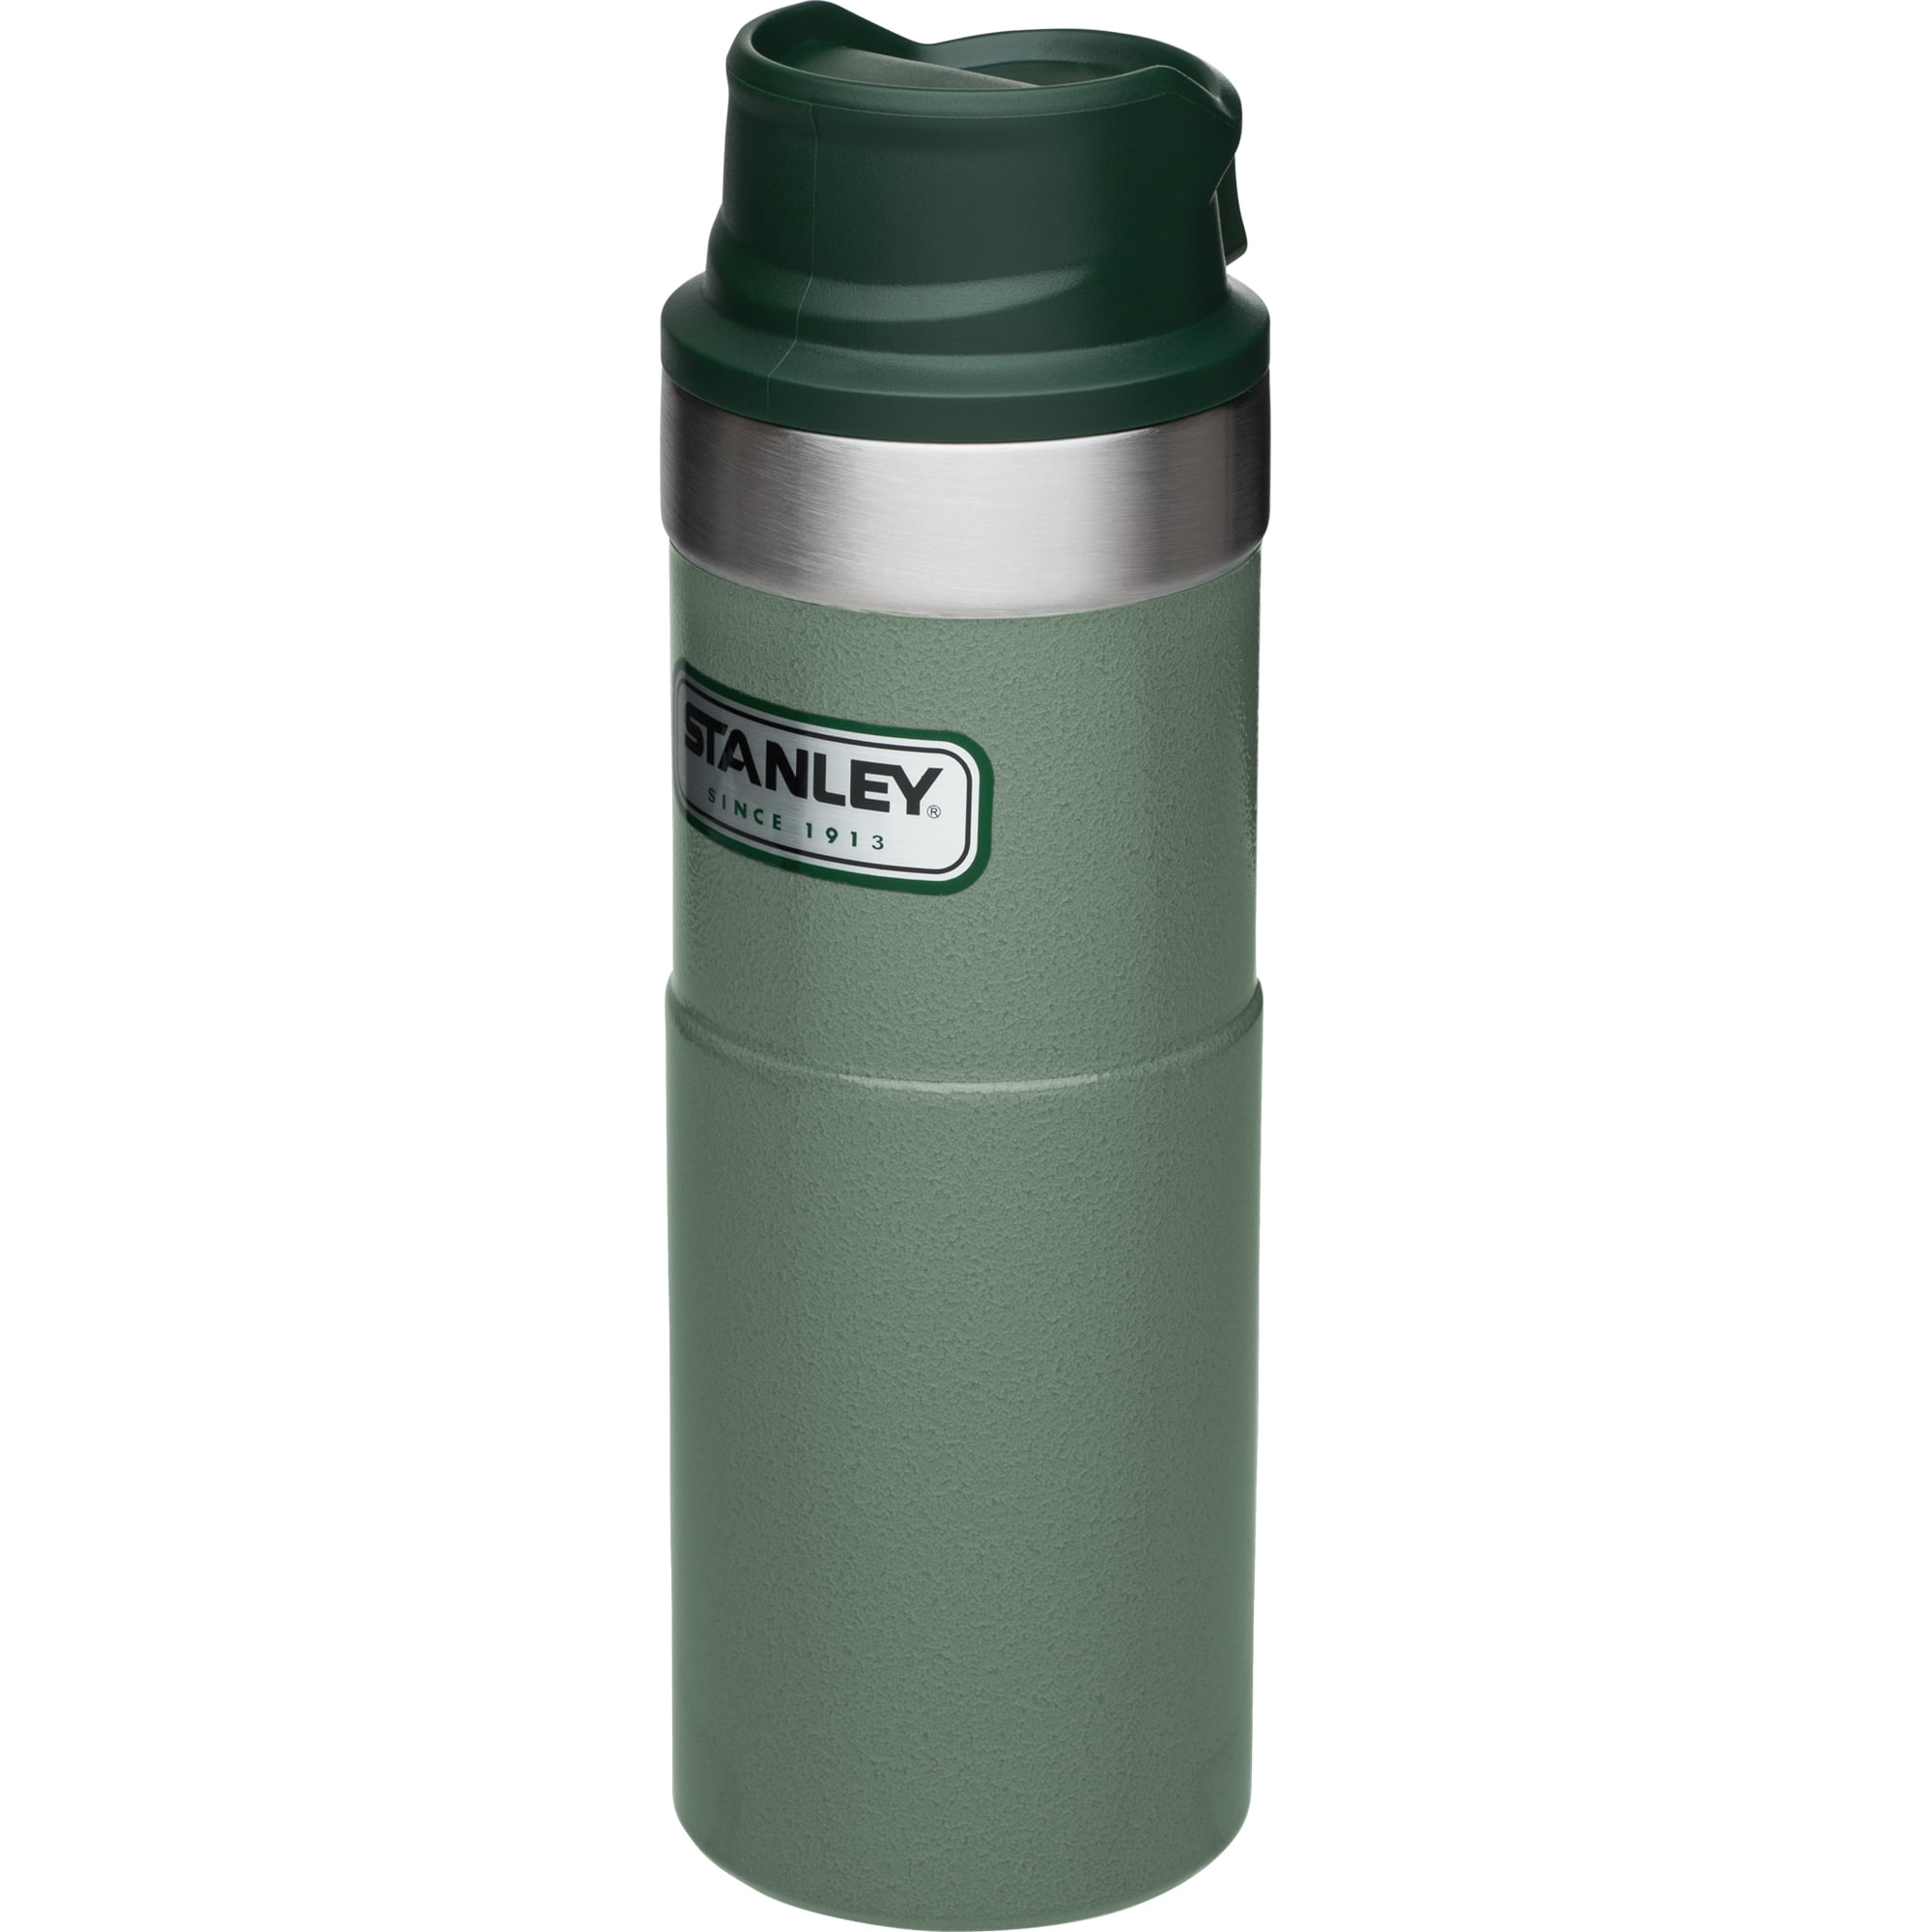 Stanley Classic Trigger-Action 16 oz. Travel Mug, Mo Country DNA